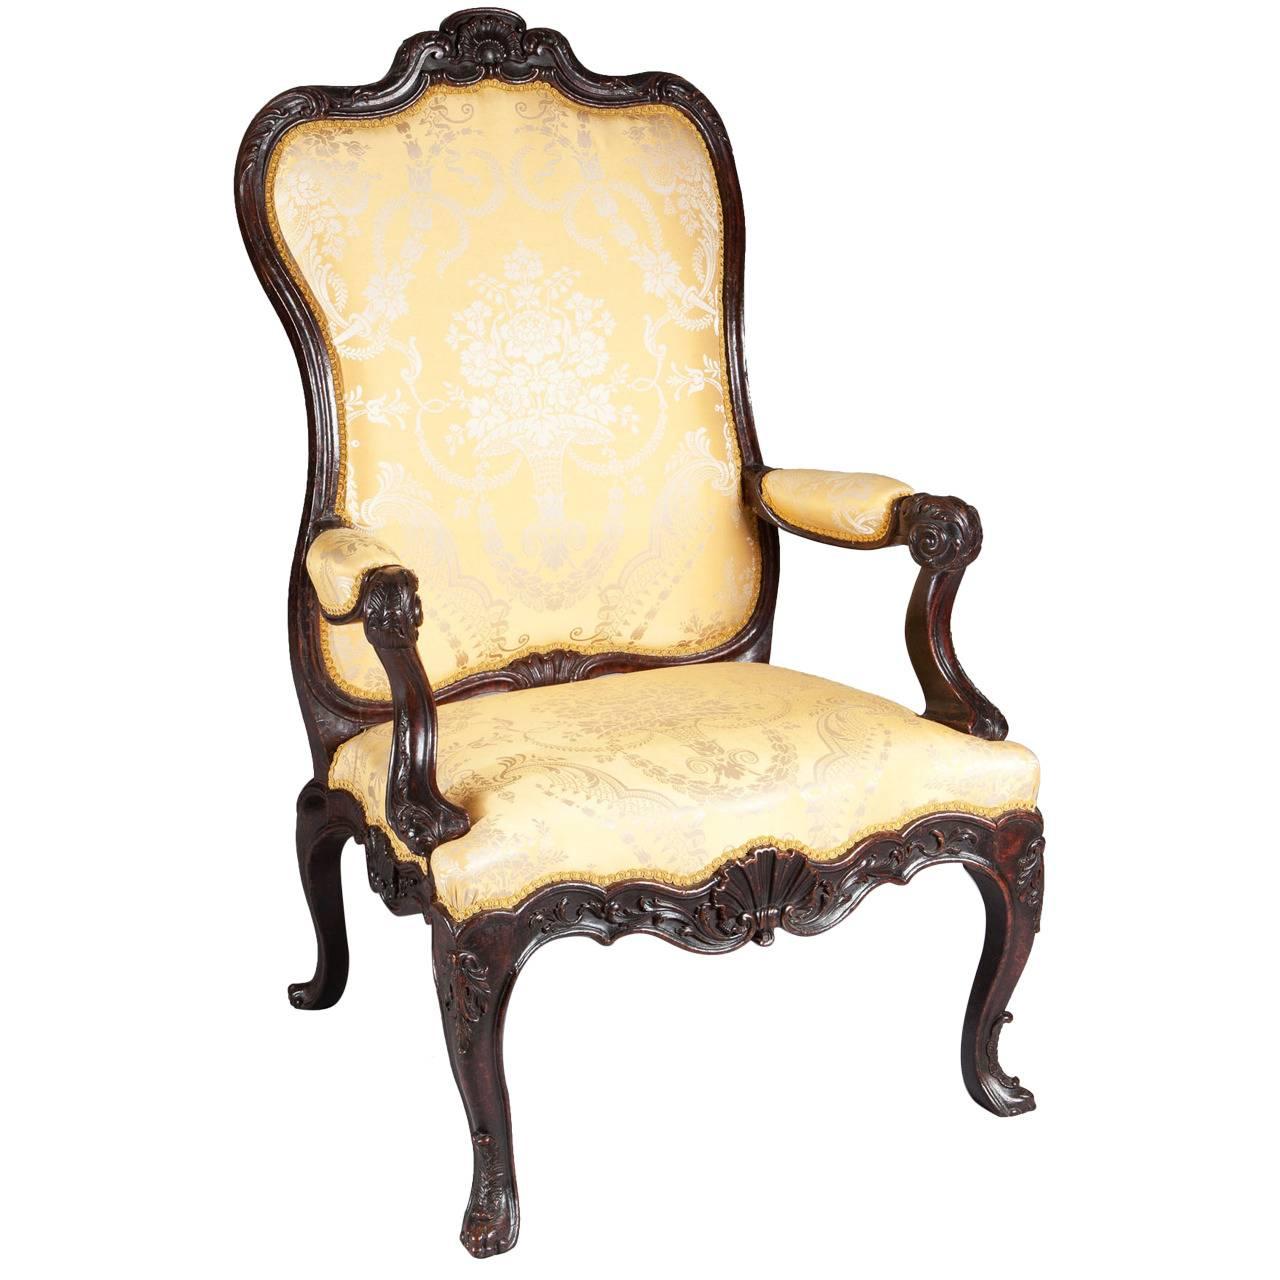 18th Century Large-Scale Continental Armchair